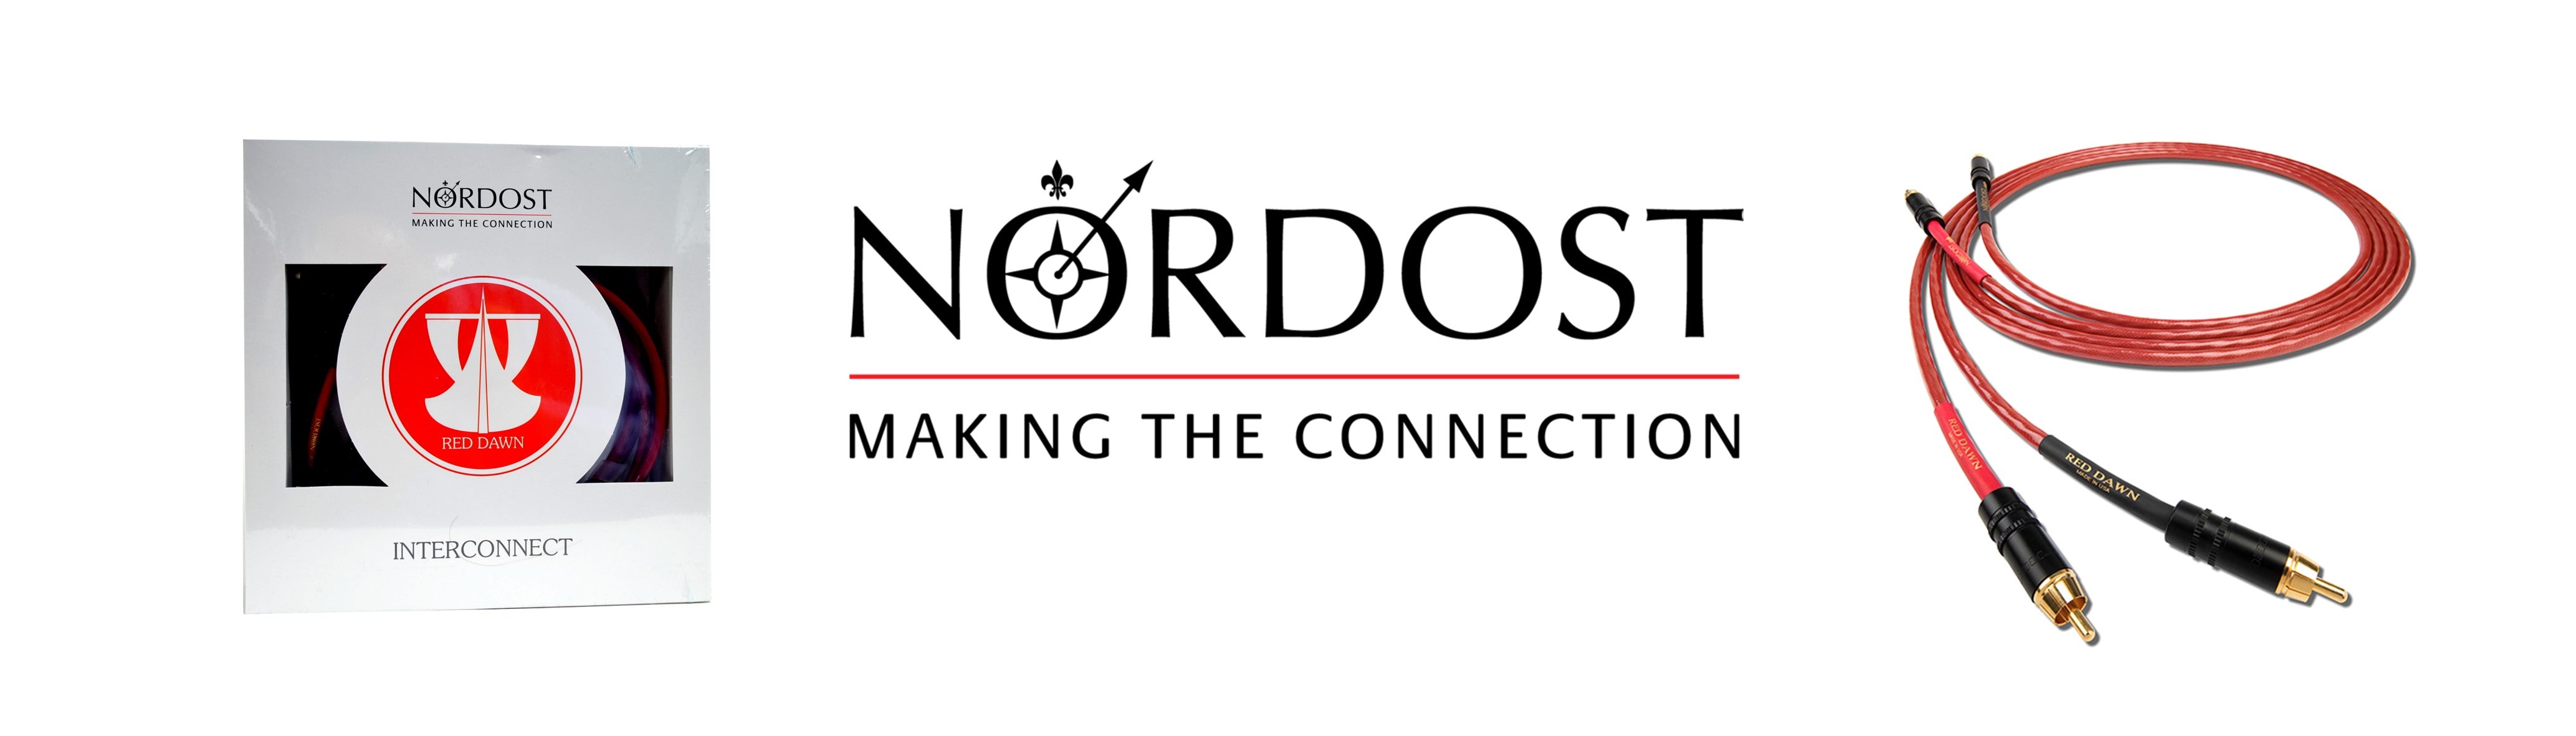 NORDOST CLEARANCE